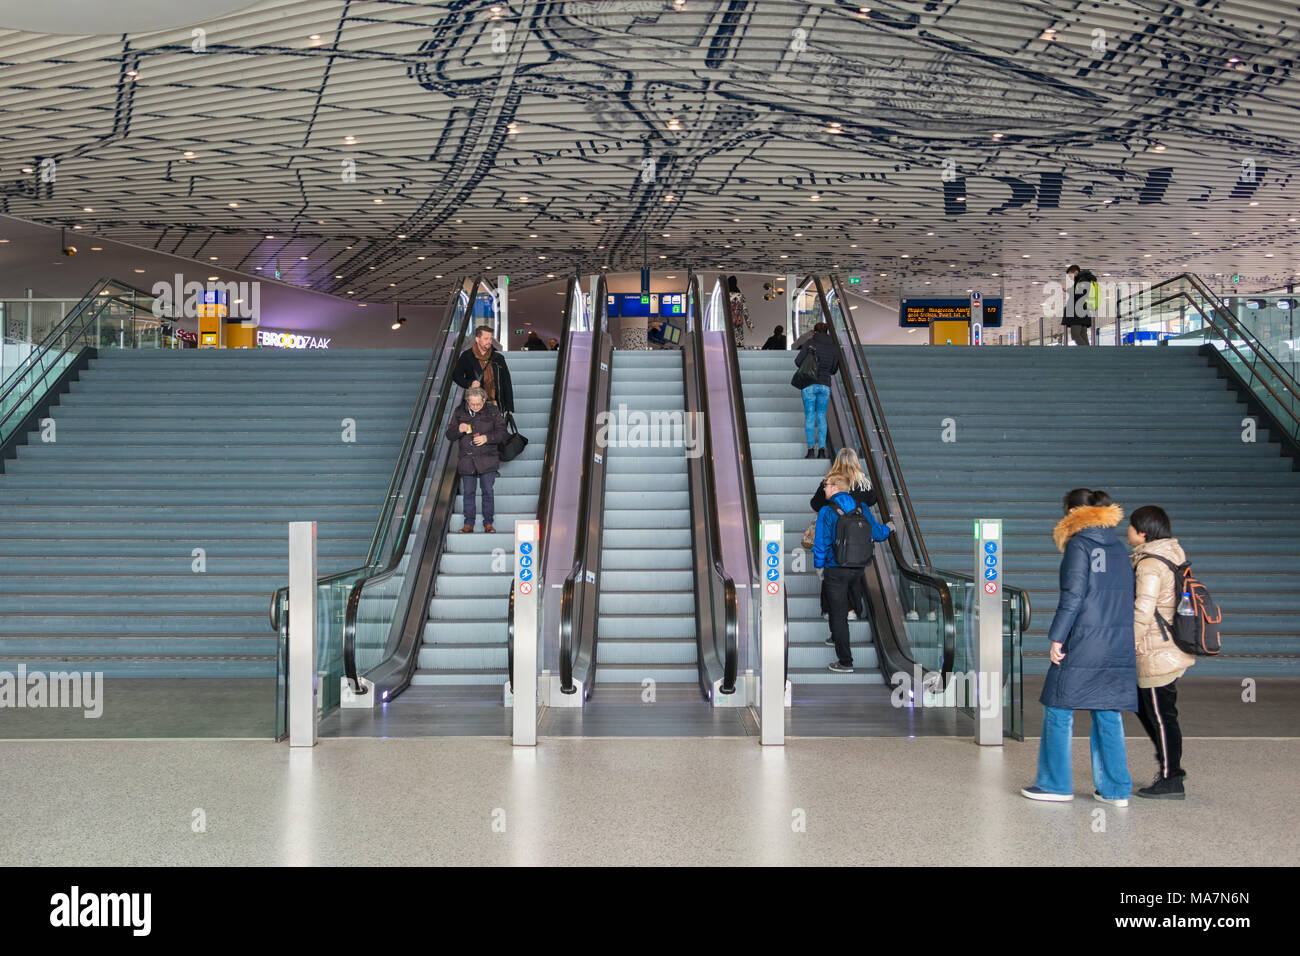 Concourse of new railway station Delft with travellers at escalator Stock Photo